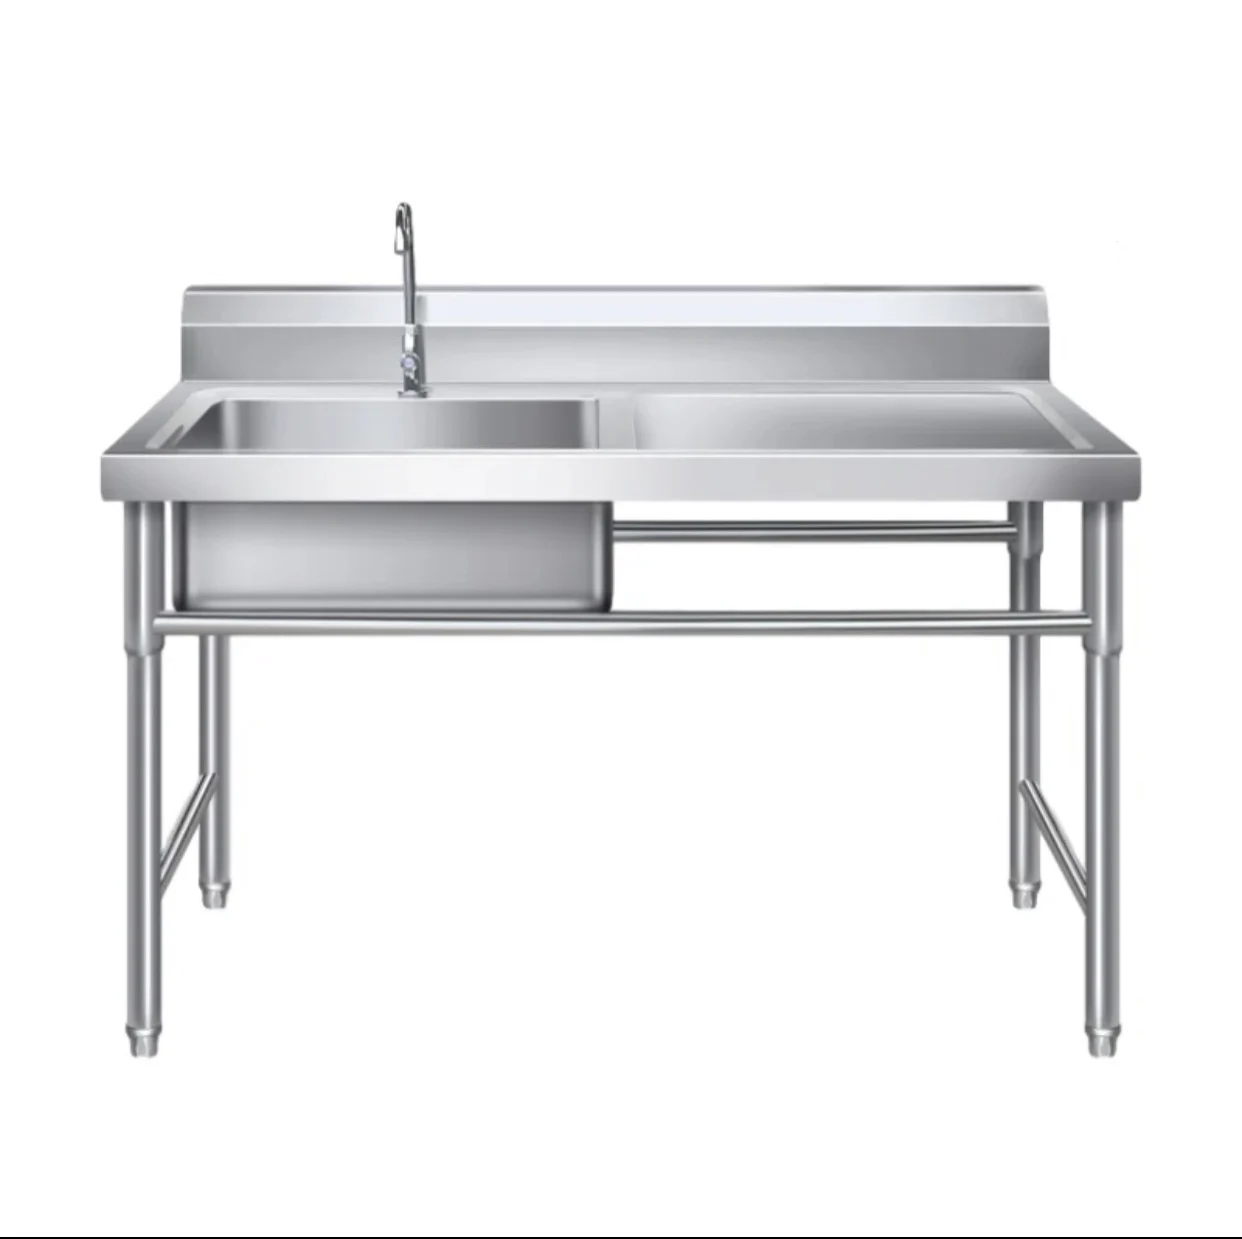 Factory direct sale stainless steel table with sink sri lanka double bowl stainless steel kitchen sink  sink stainless steel kit